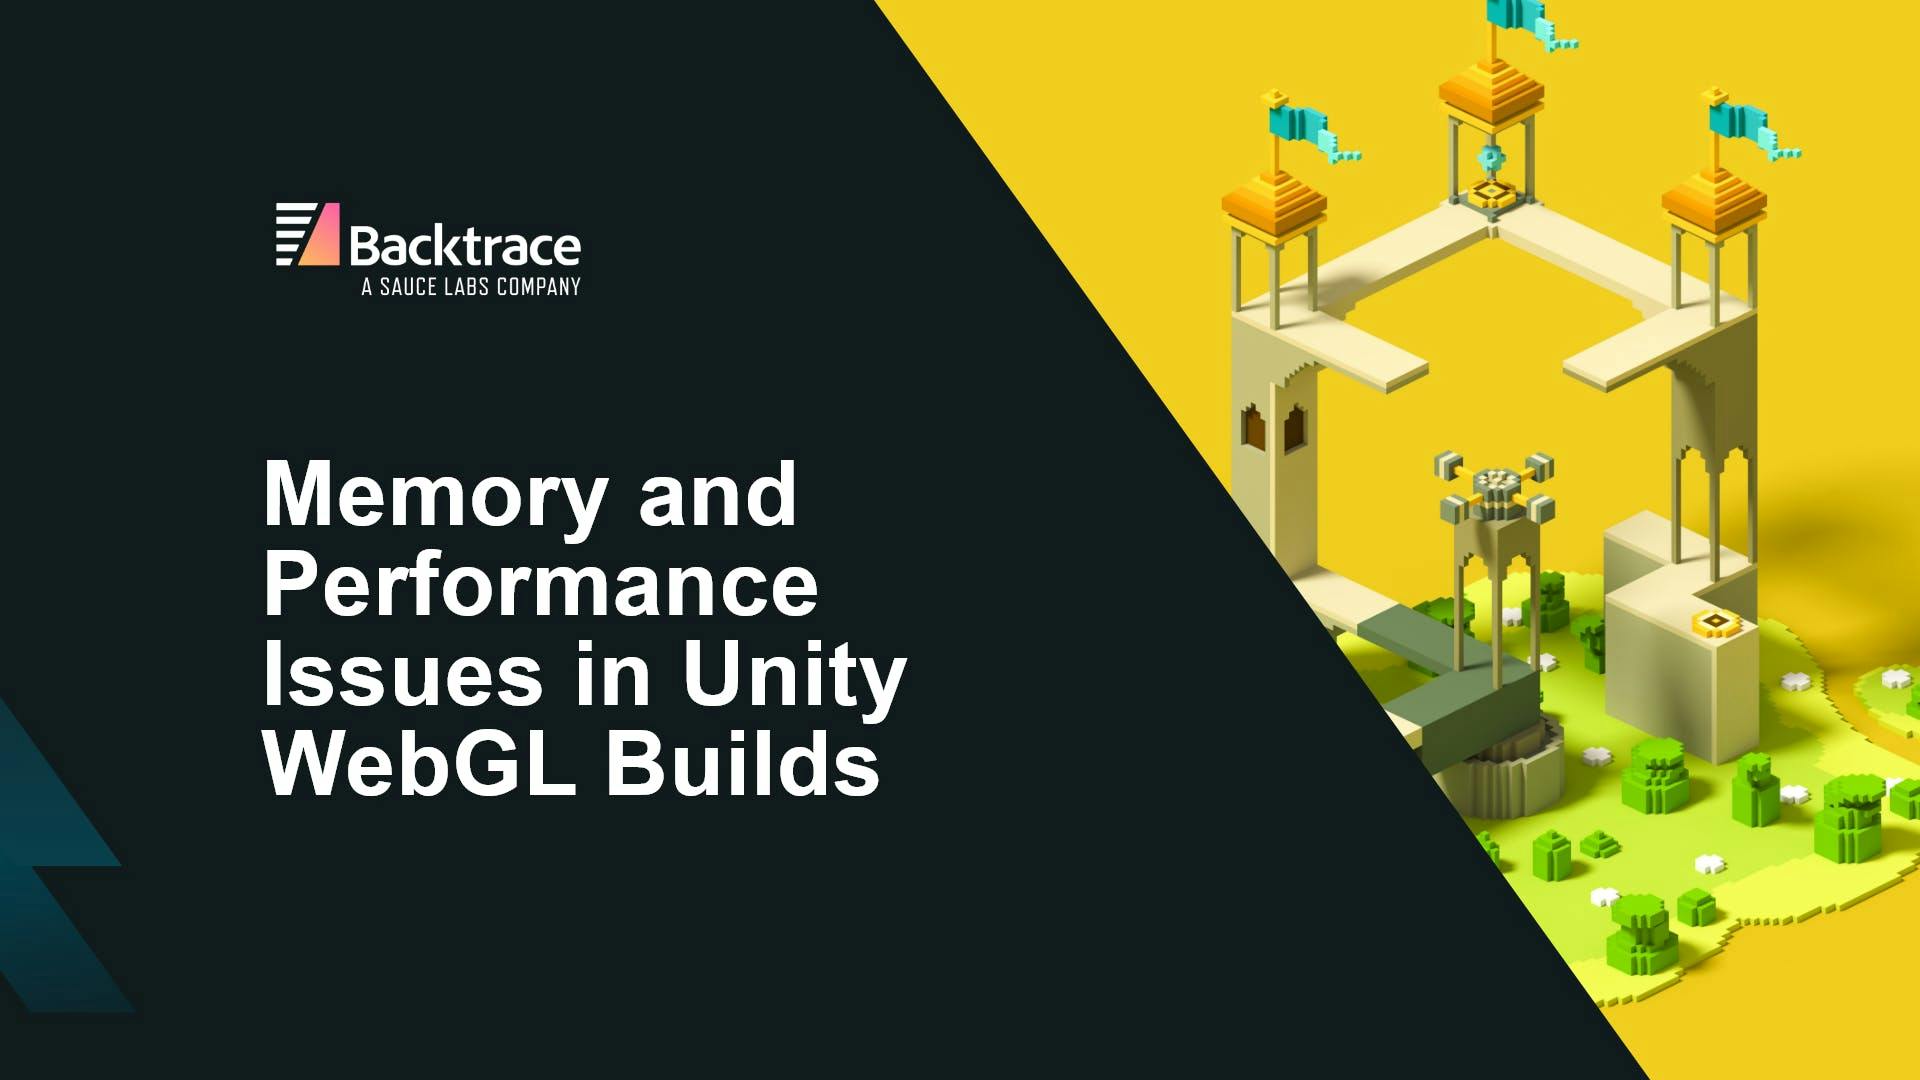 Thumbnail image for blog post: Memory and Performance Issues in Unity WebGL Builds